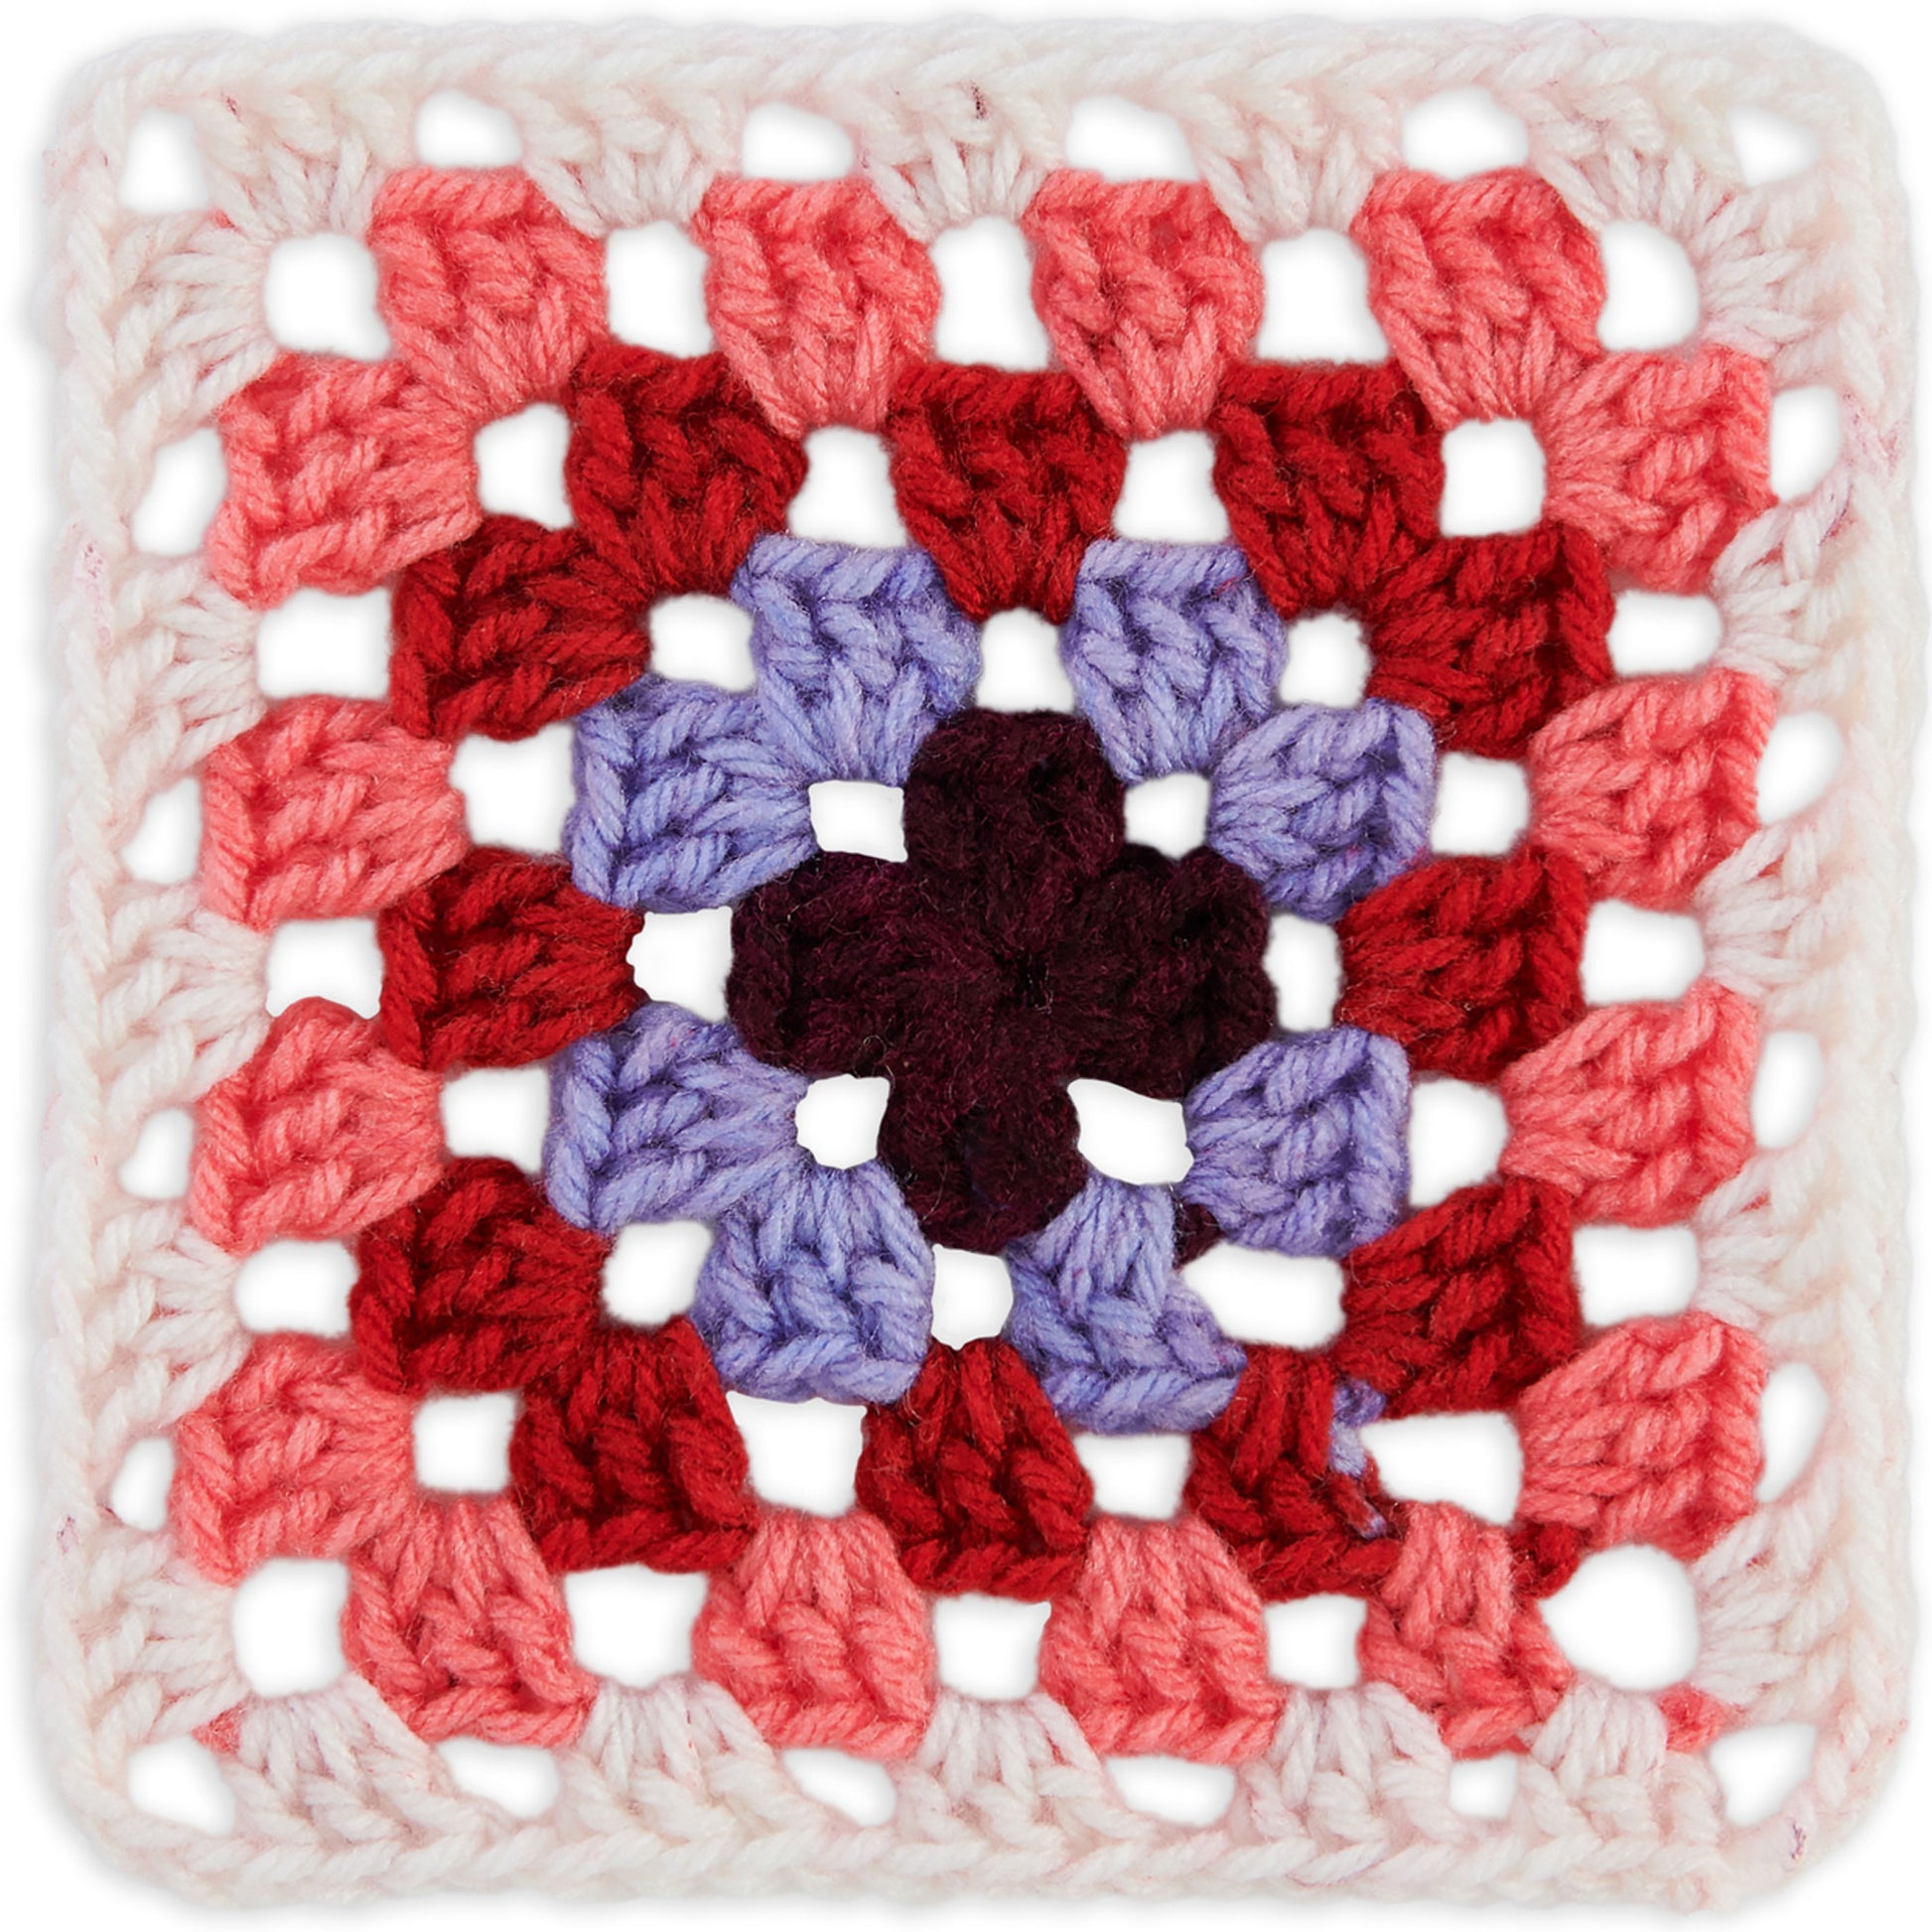 Introducing: Red Heart All in One Granny Square 